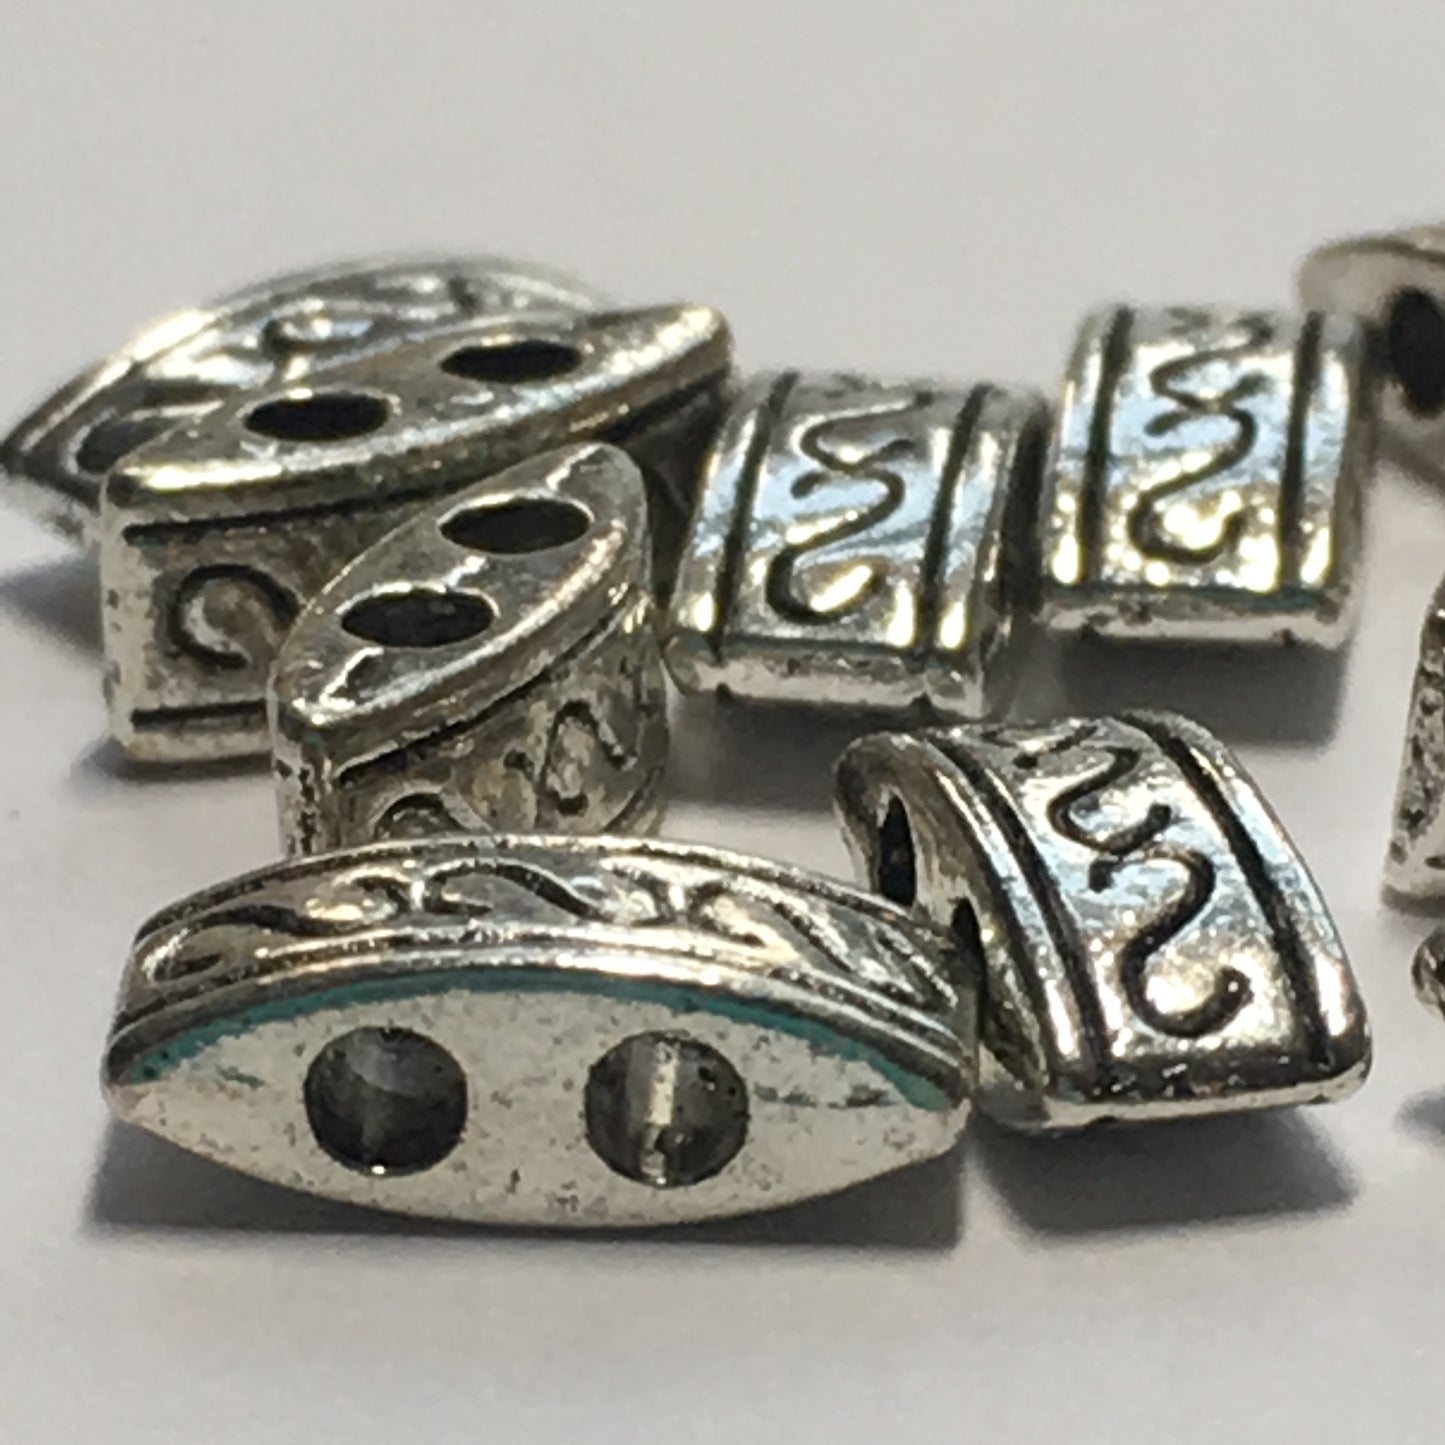 Antique Silver Two-Strand Spacer Bead, 10 x 4 mm - 10 or 20 Beads